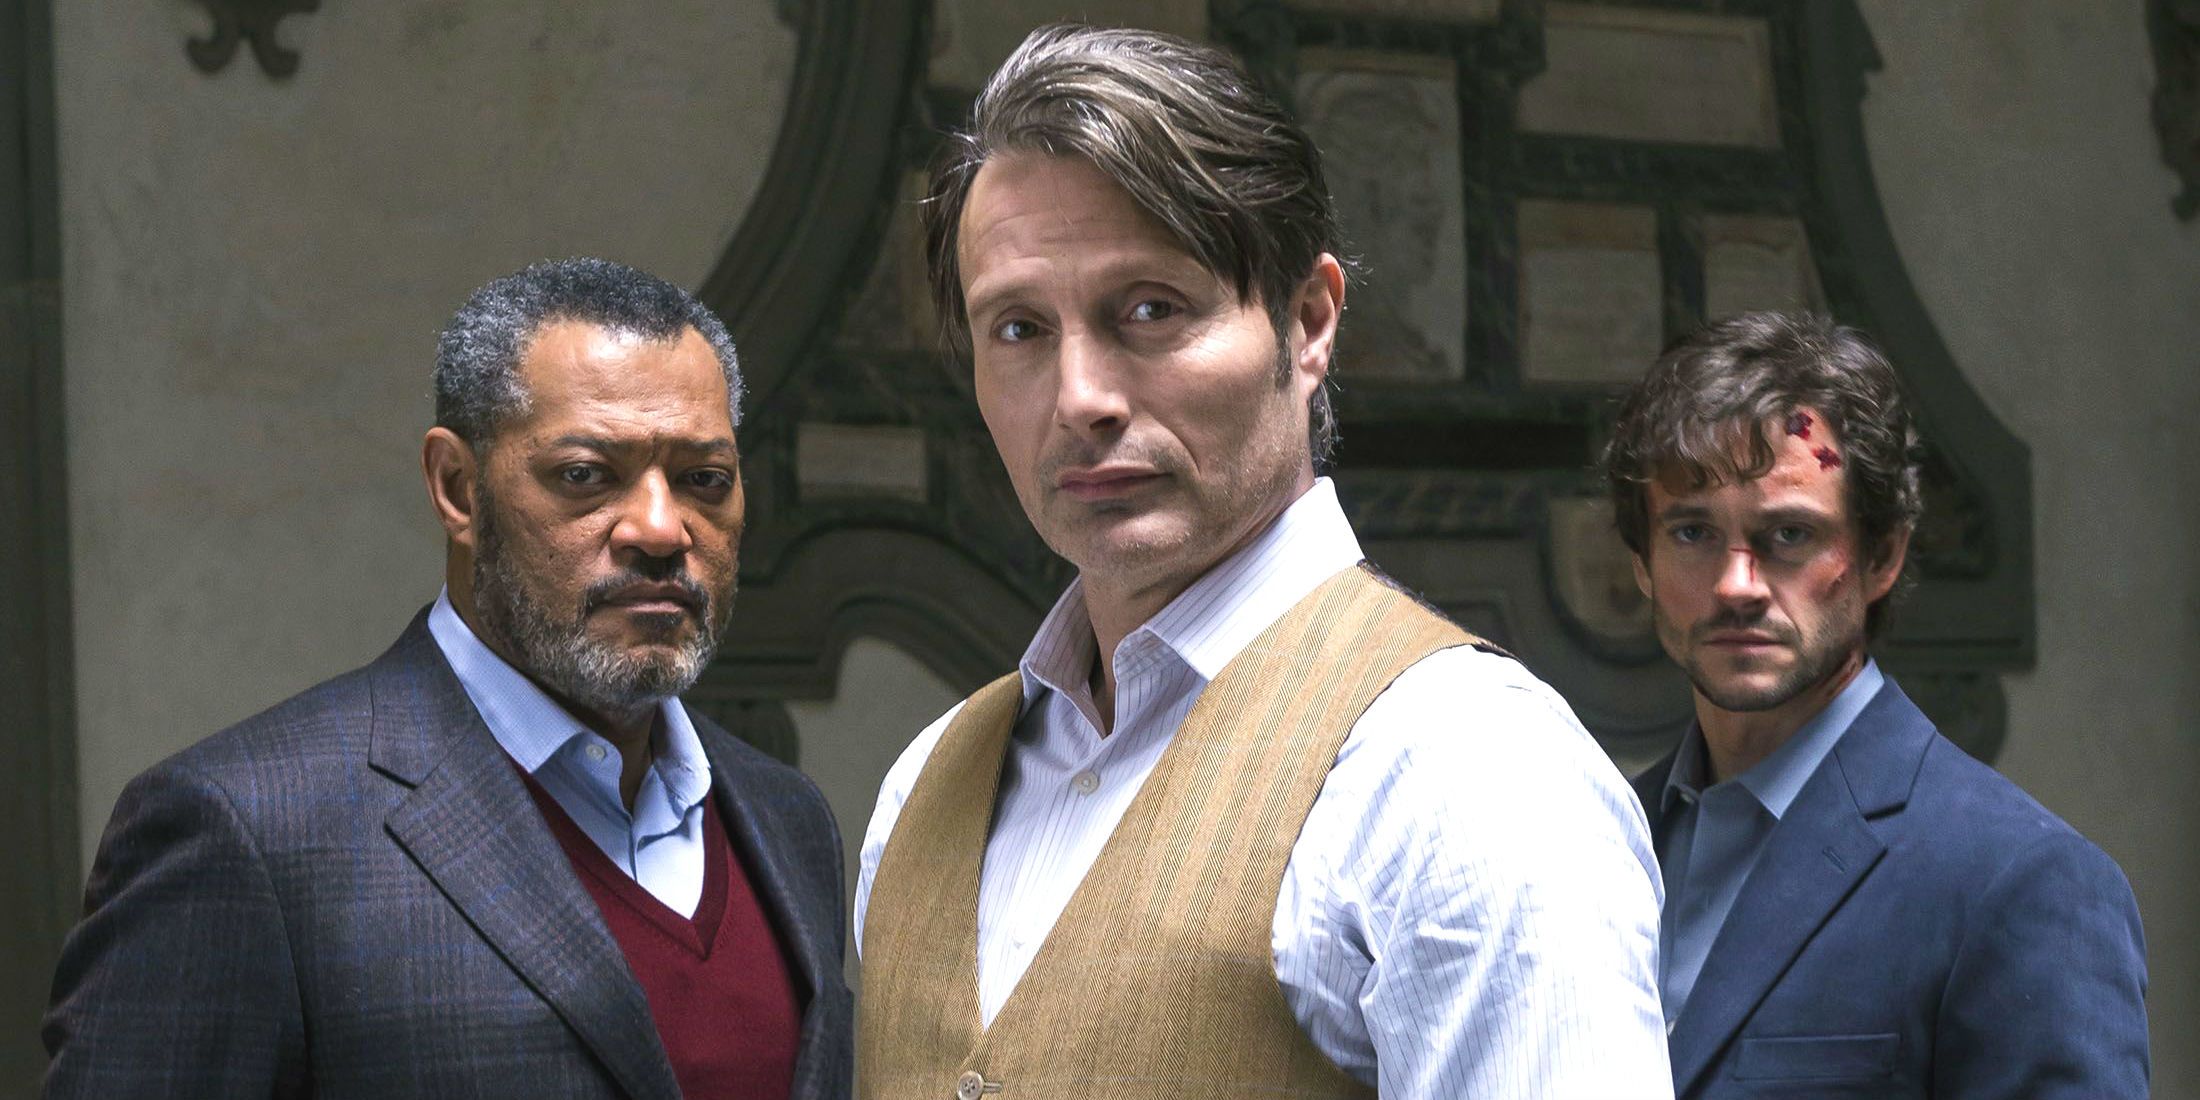 Jack Crawford Hannibal Lecter and Will Graham